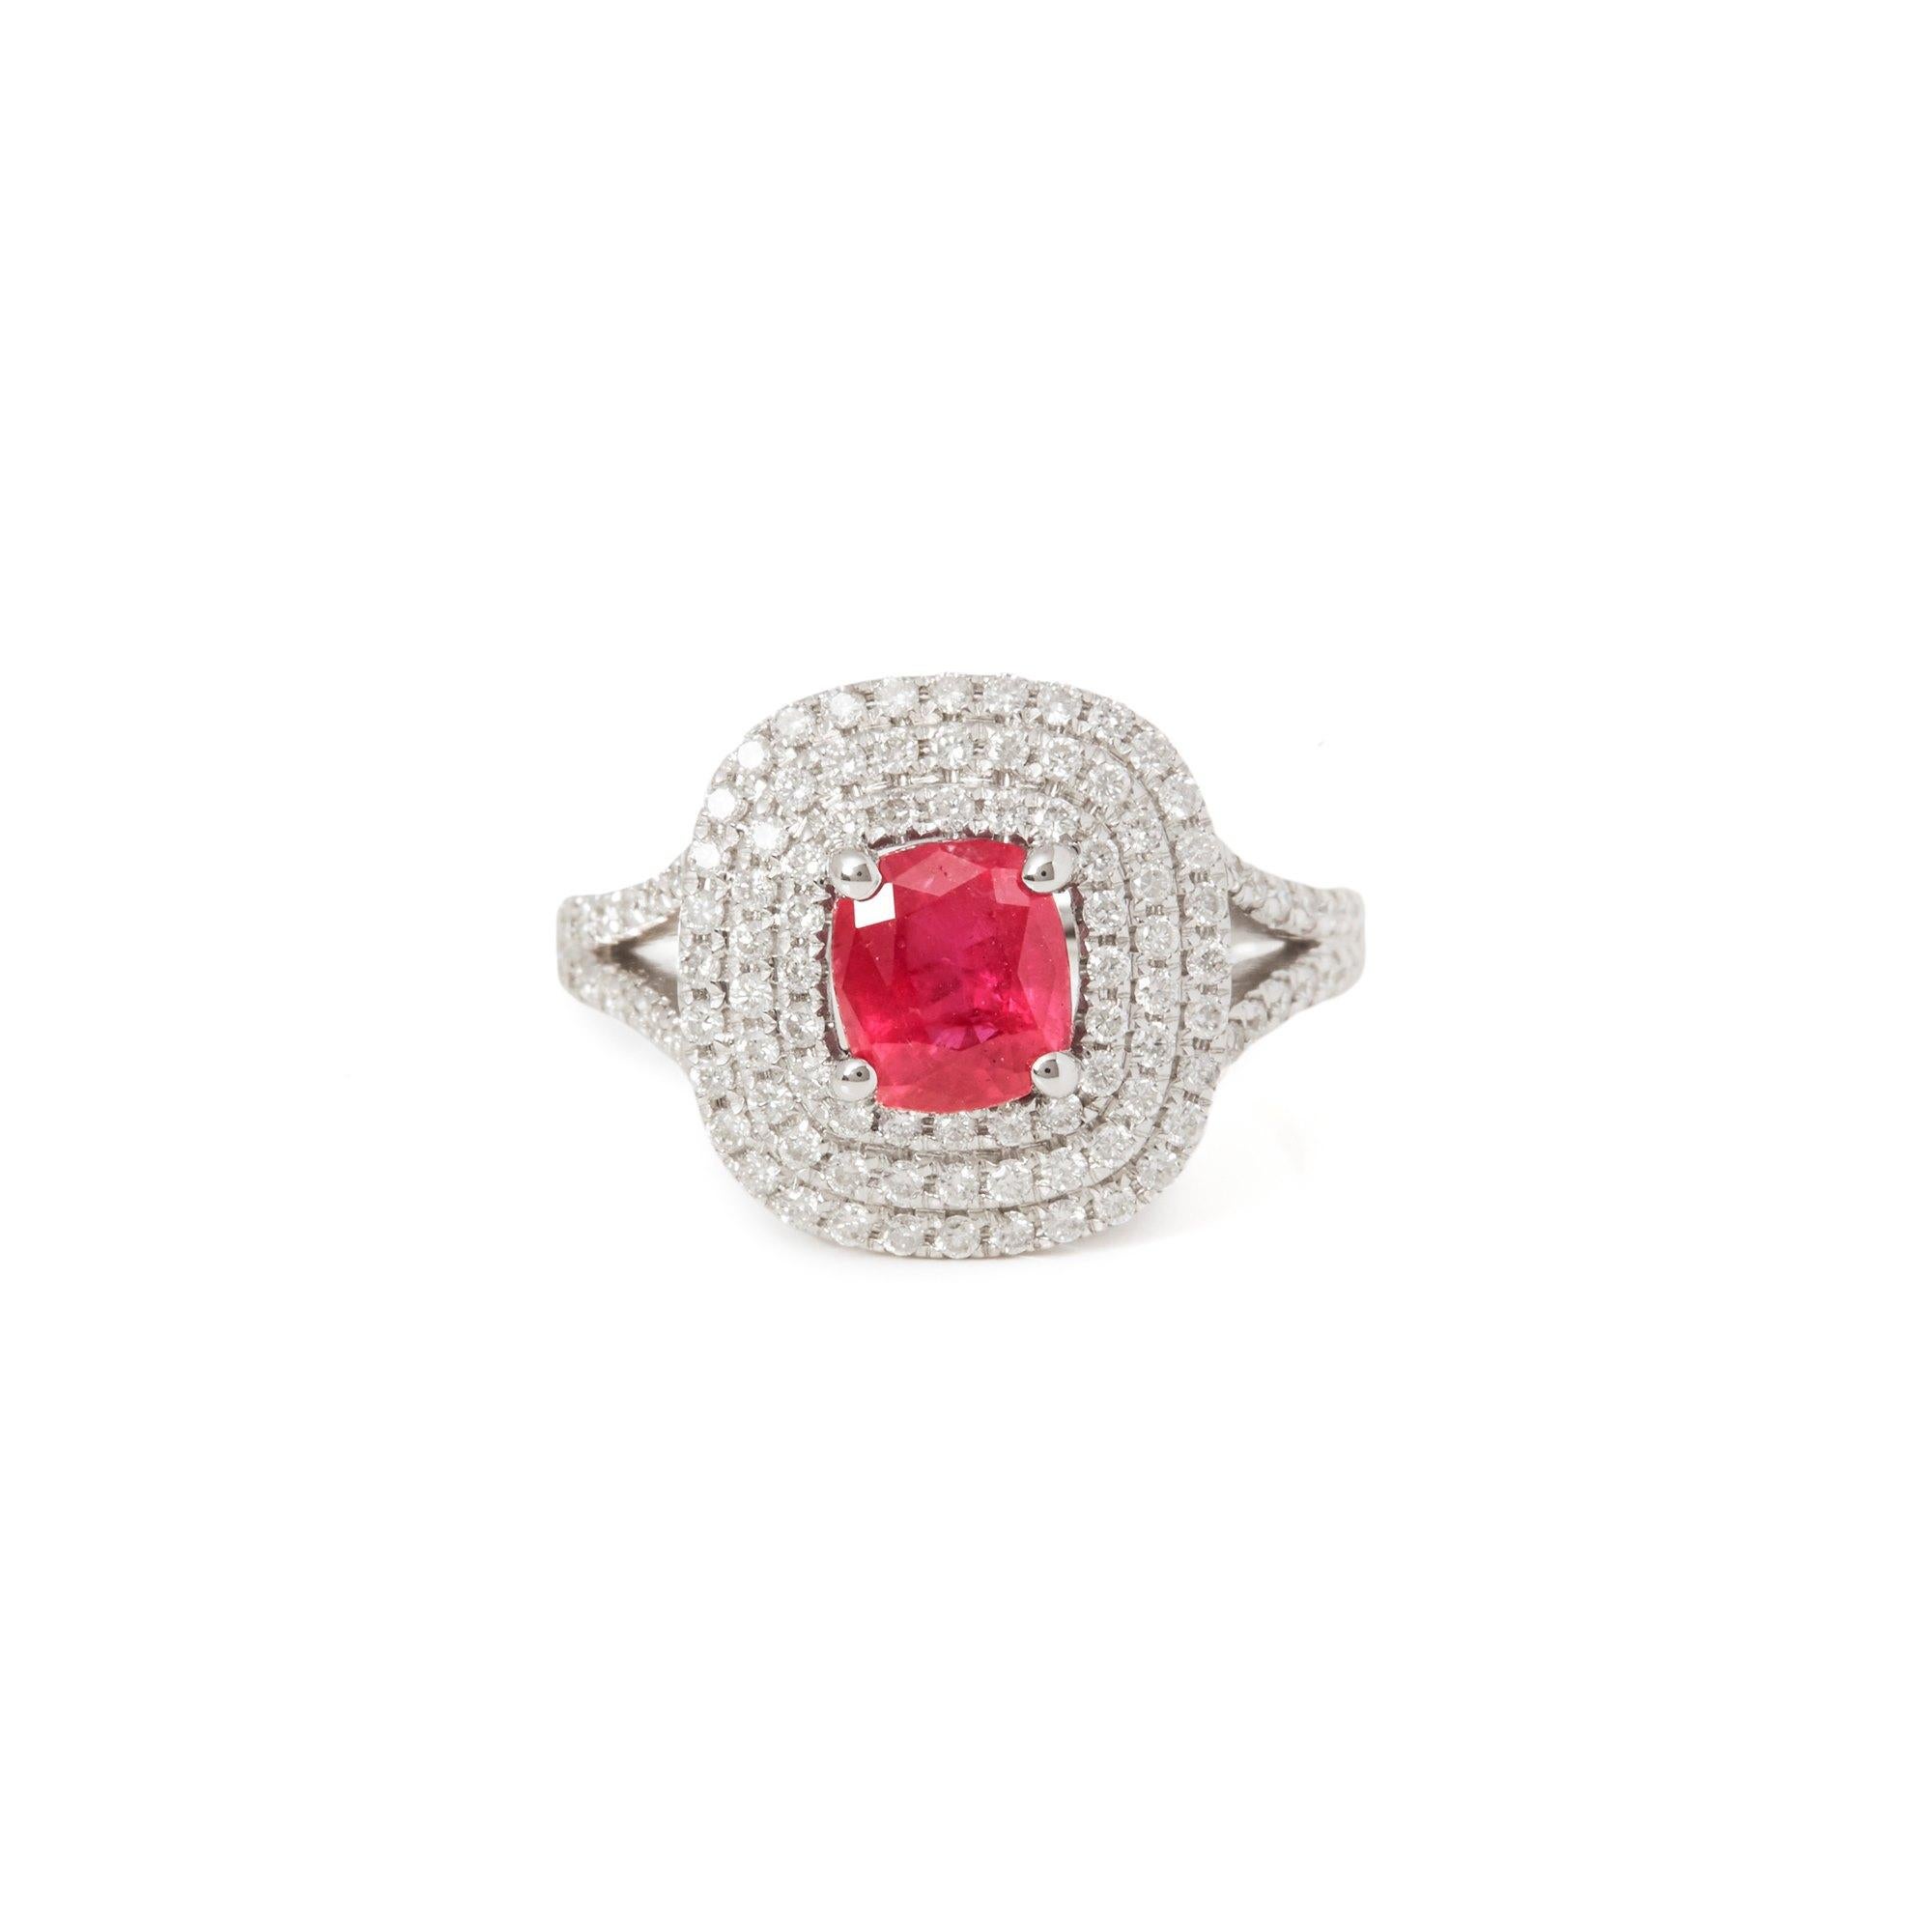 This ring designed by David Jerome is from his private collection and features one cushion cut Ruby totalling 1.50cts sourced in Vietnam. Set with round brilliant cut Diamonds totalling 0.75cts mounted in an 18k white gold setting. UK finger size N,